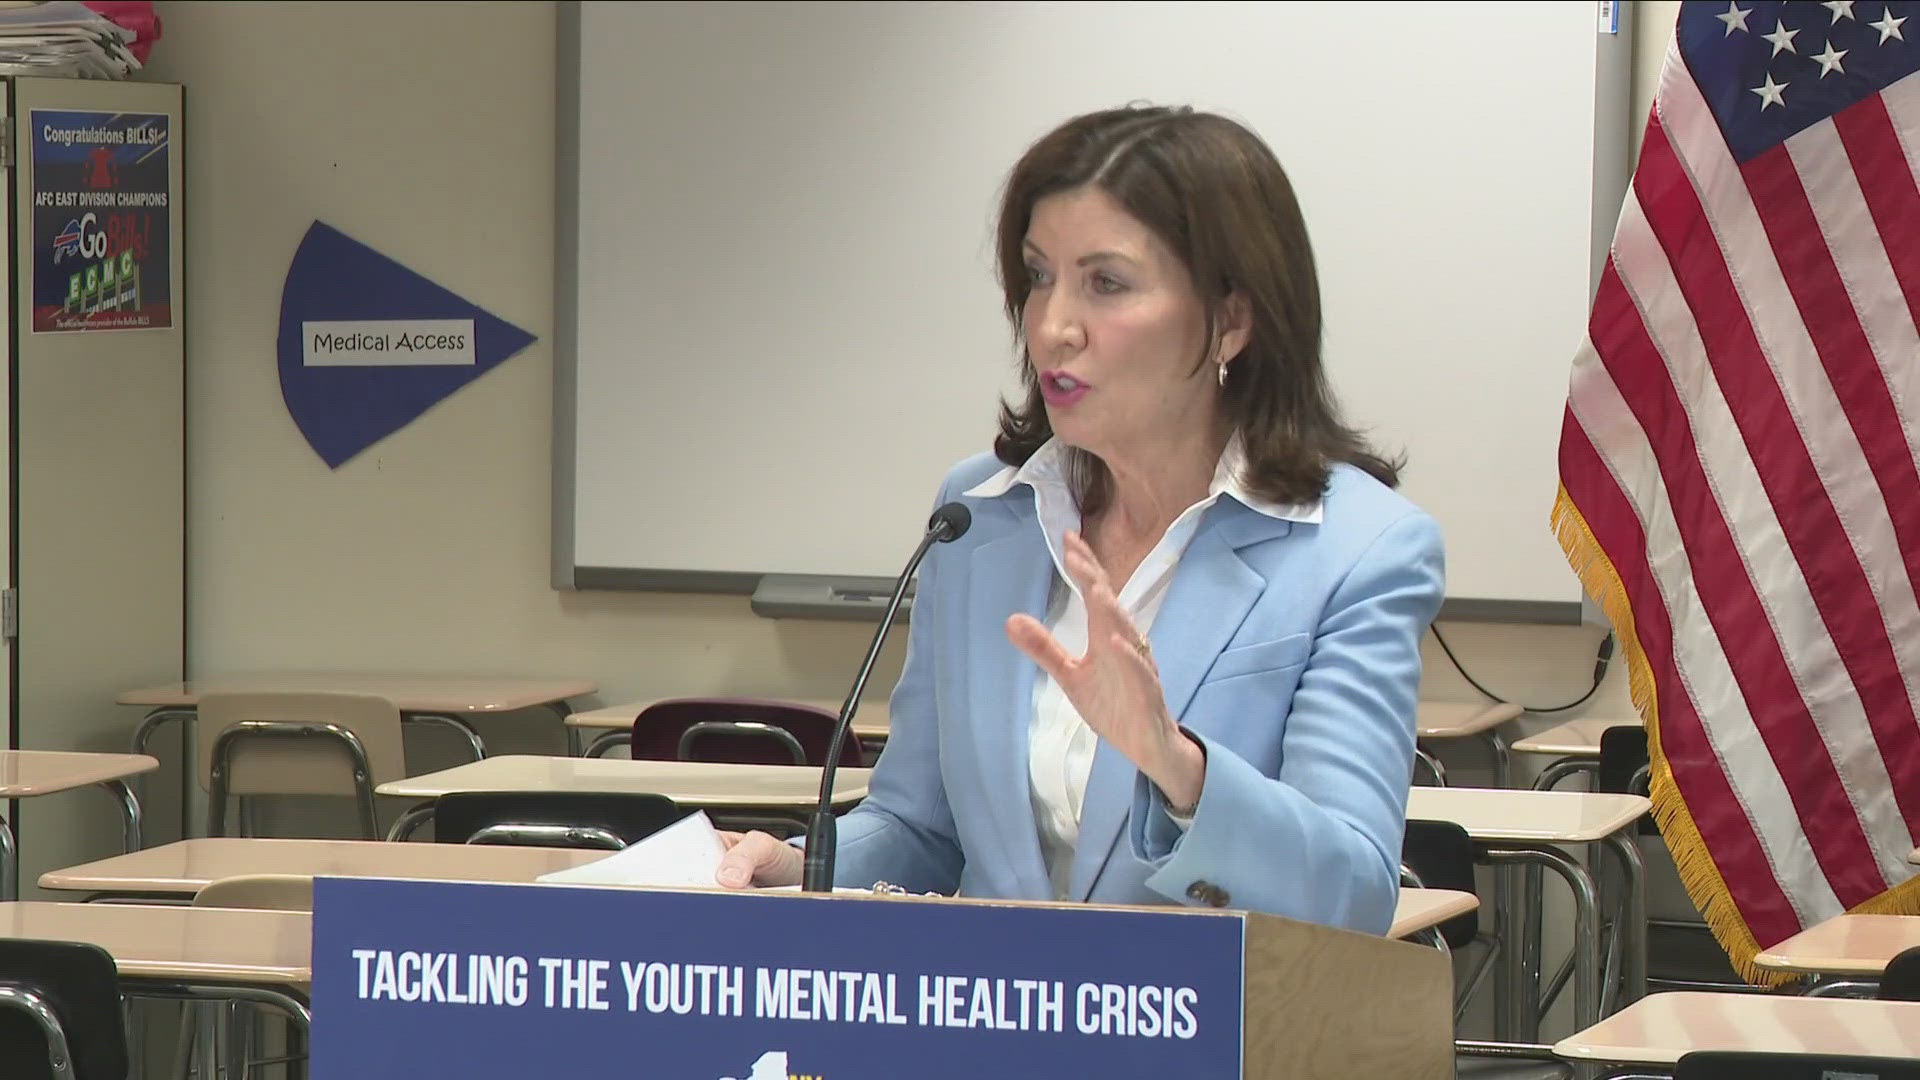 Hochul is hoping to advance legislation that would restrict addictive features on social media, as well as restrict the collection of minors’ personal data.